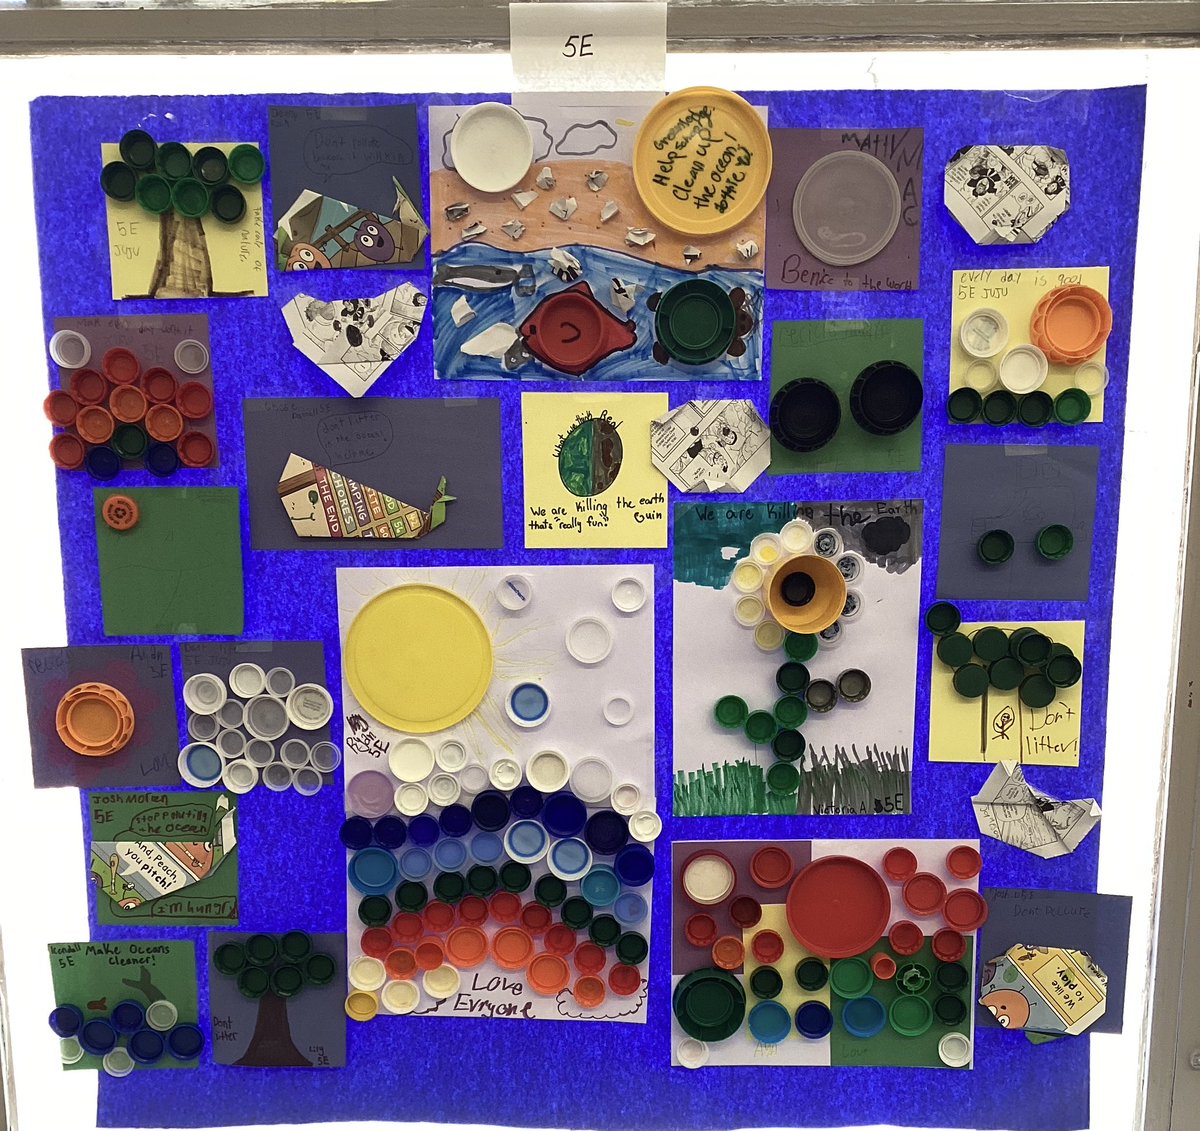 We are turning our library into a gallery of artivism. All pieces were created with recycled materials and have earned $5 each towards organizations supporting our Extraordinary Earth. @studentsrebuild